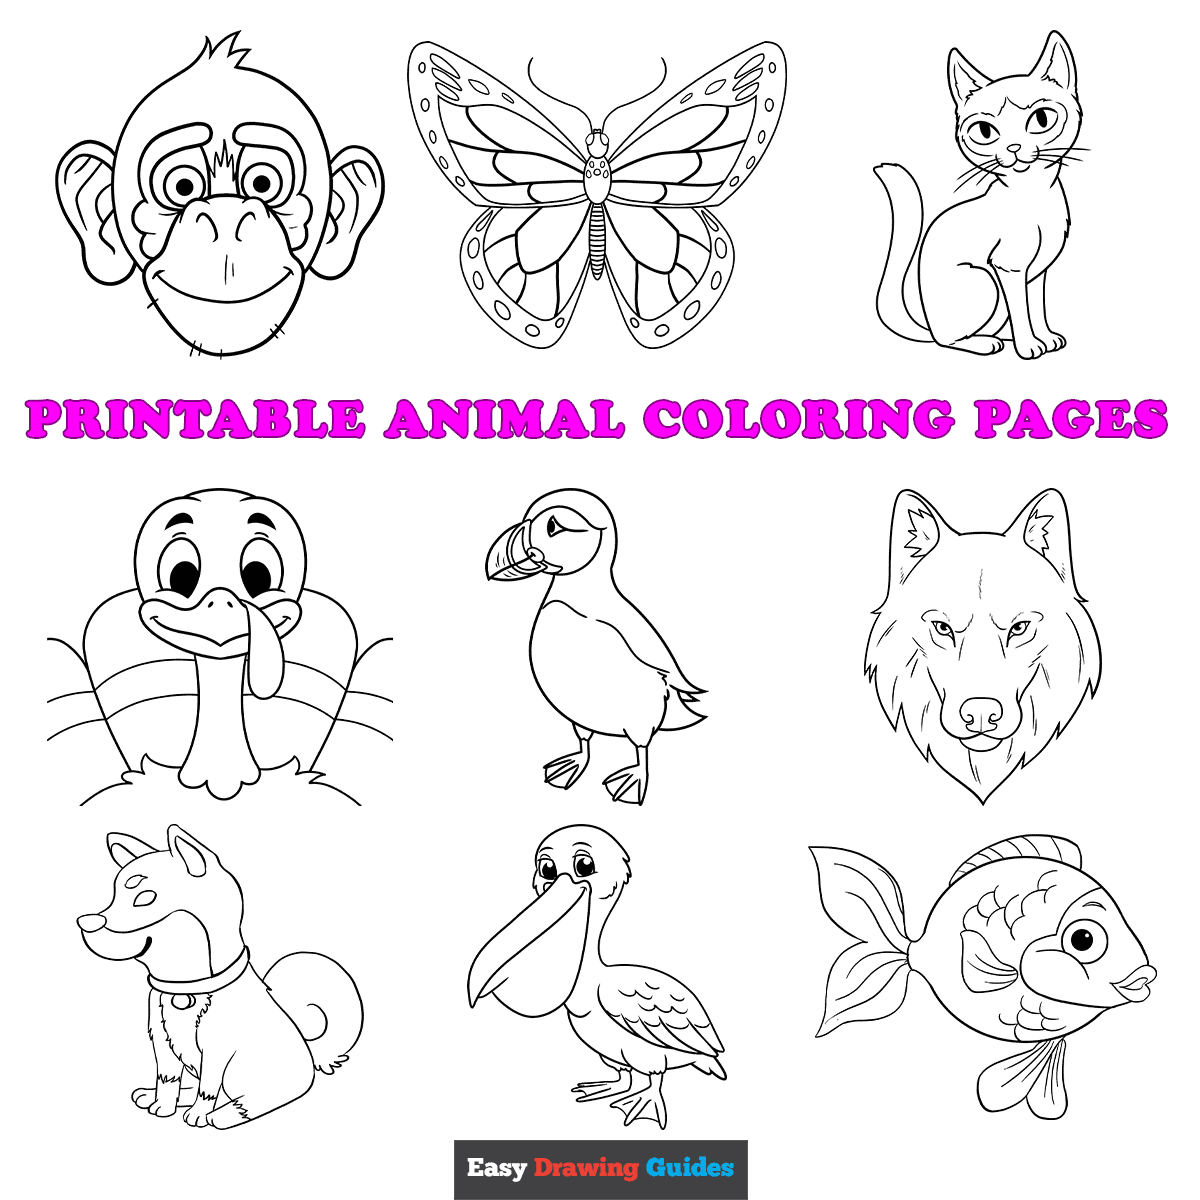 Free printable animal coloring pages for kids